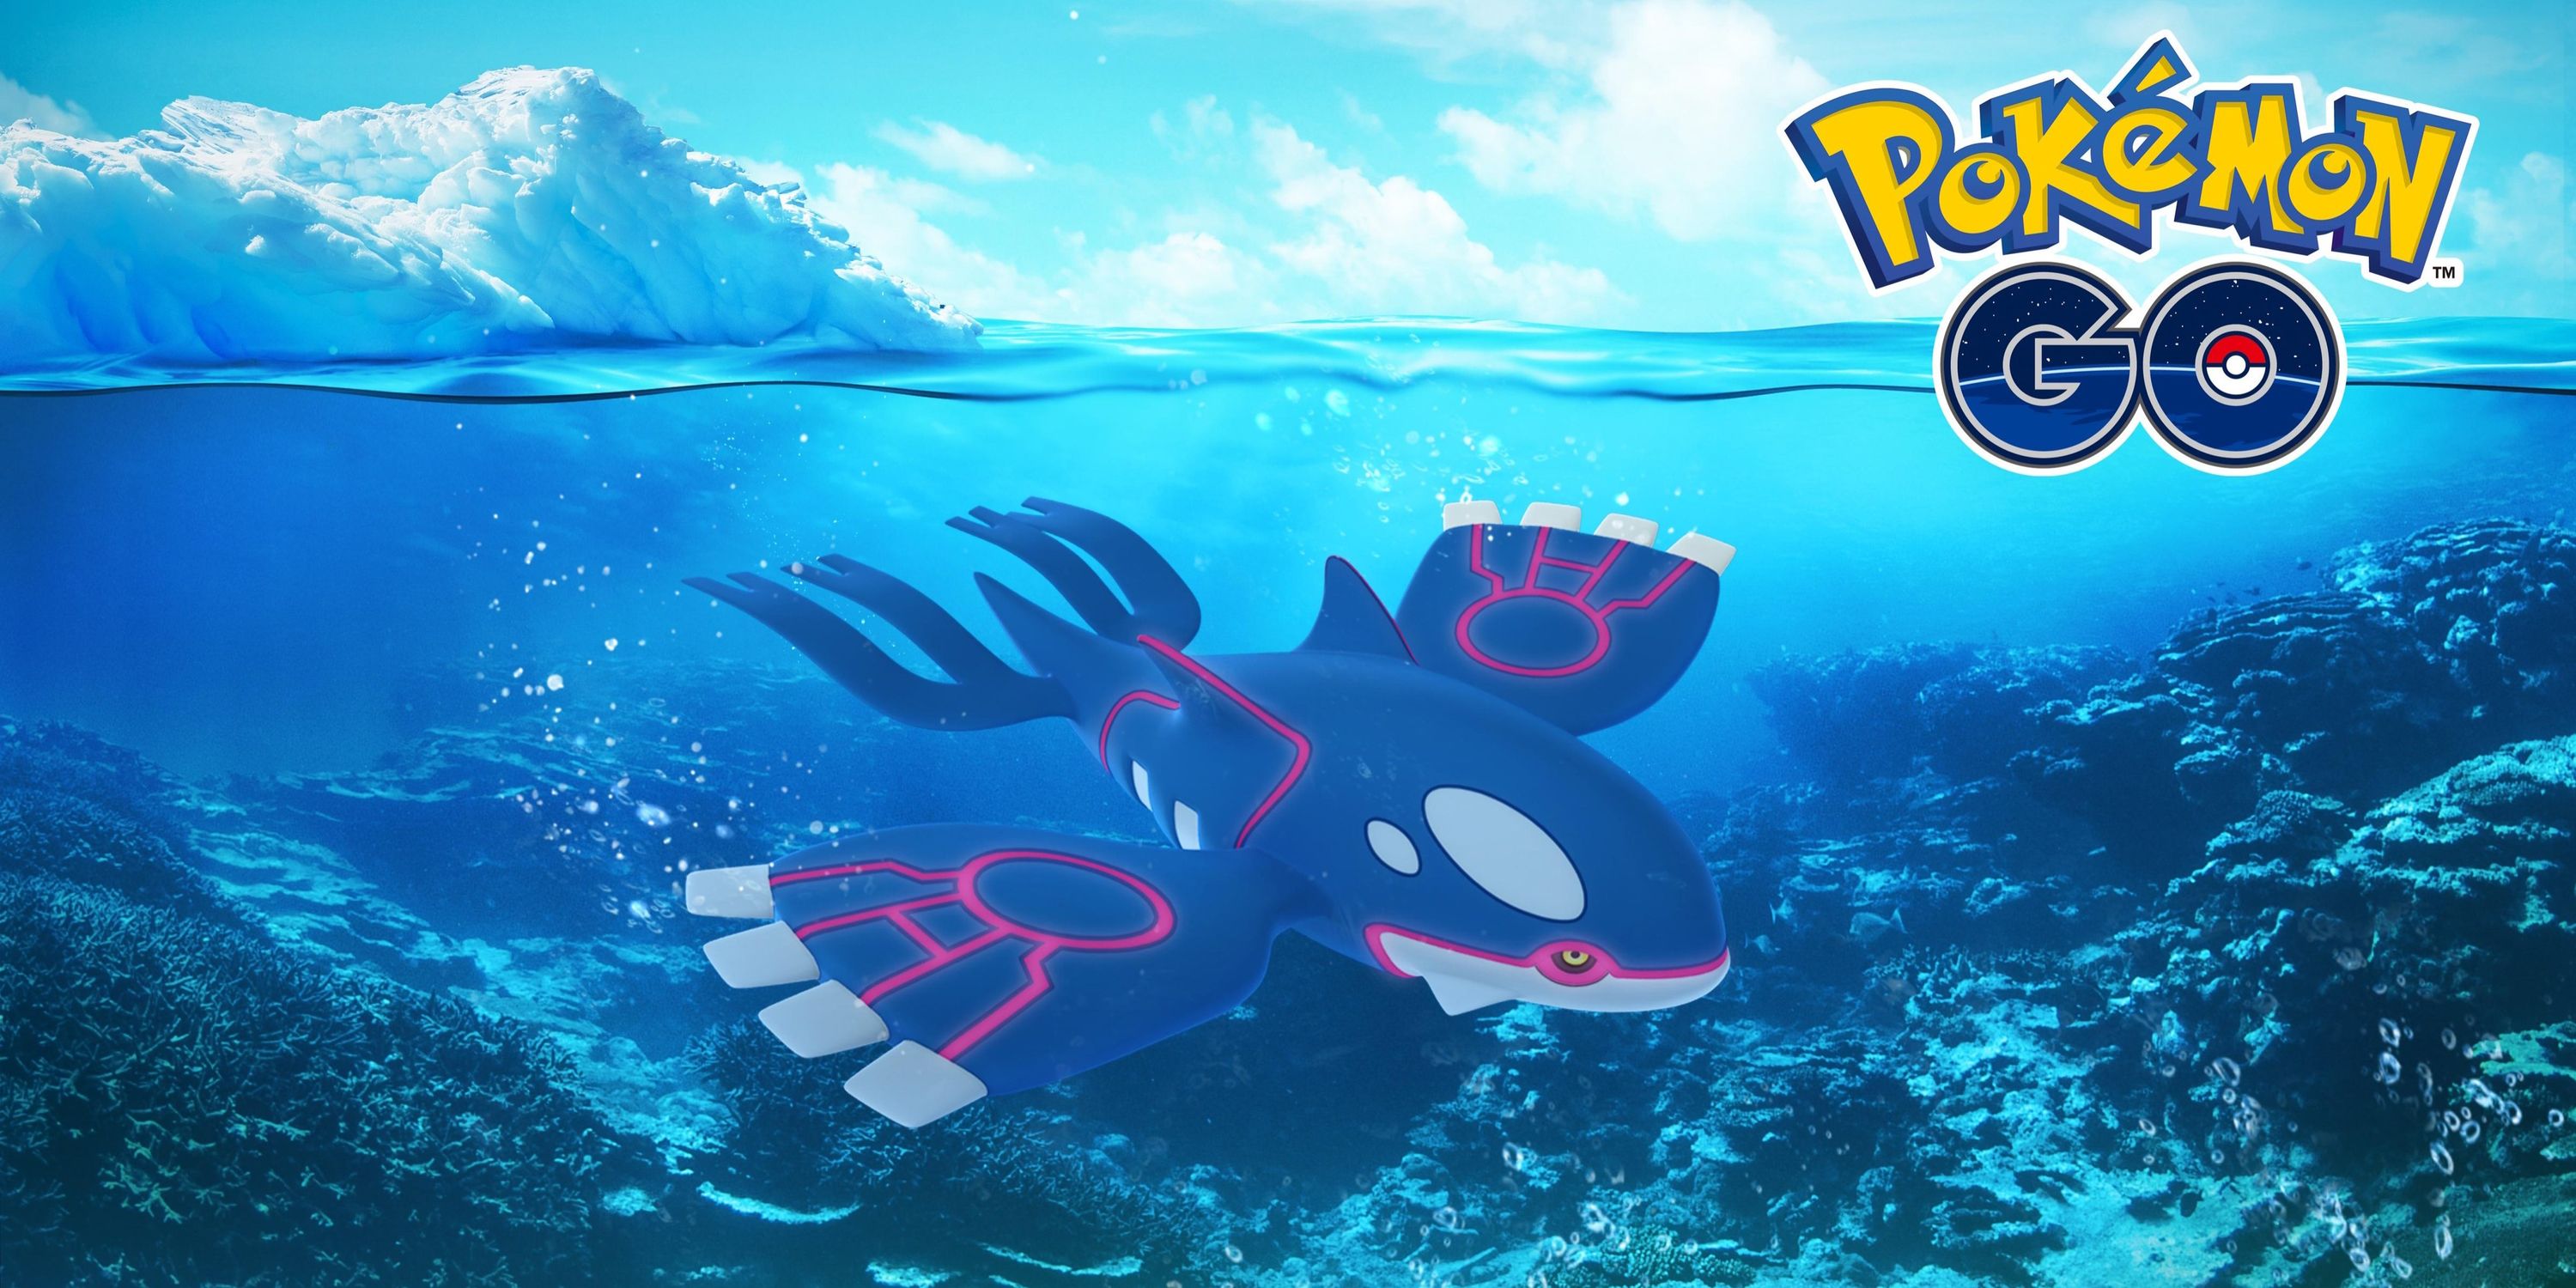 Image of Kyogre underwater with the Pokemon Go logo in the top-right corner